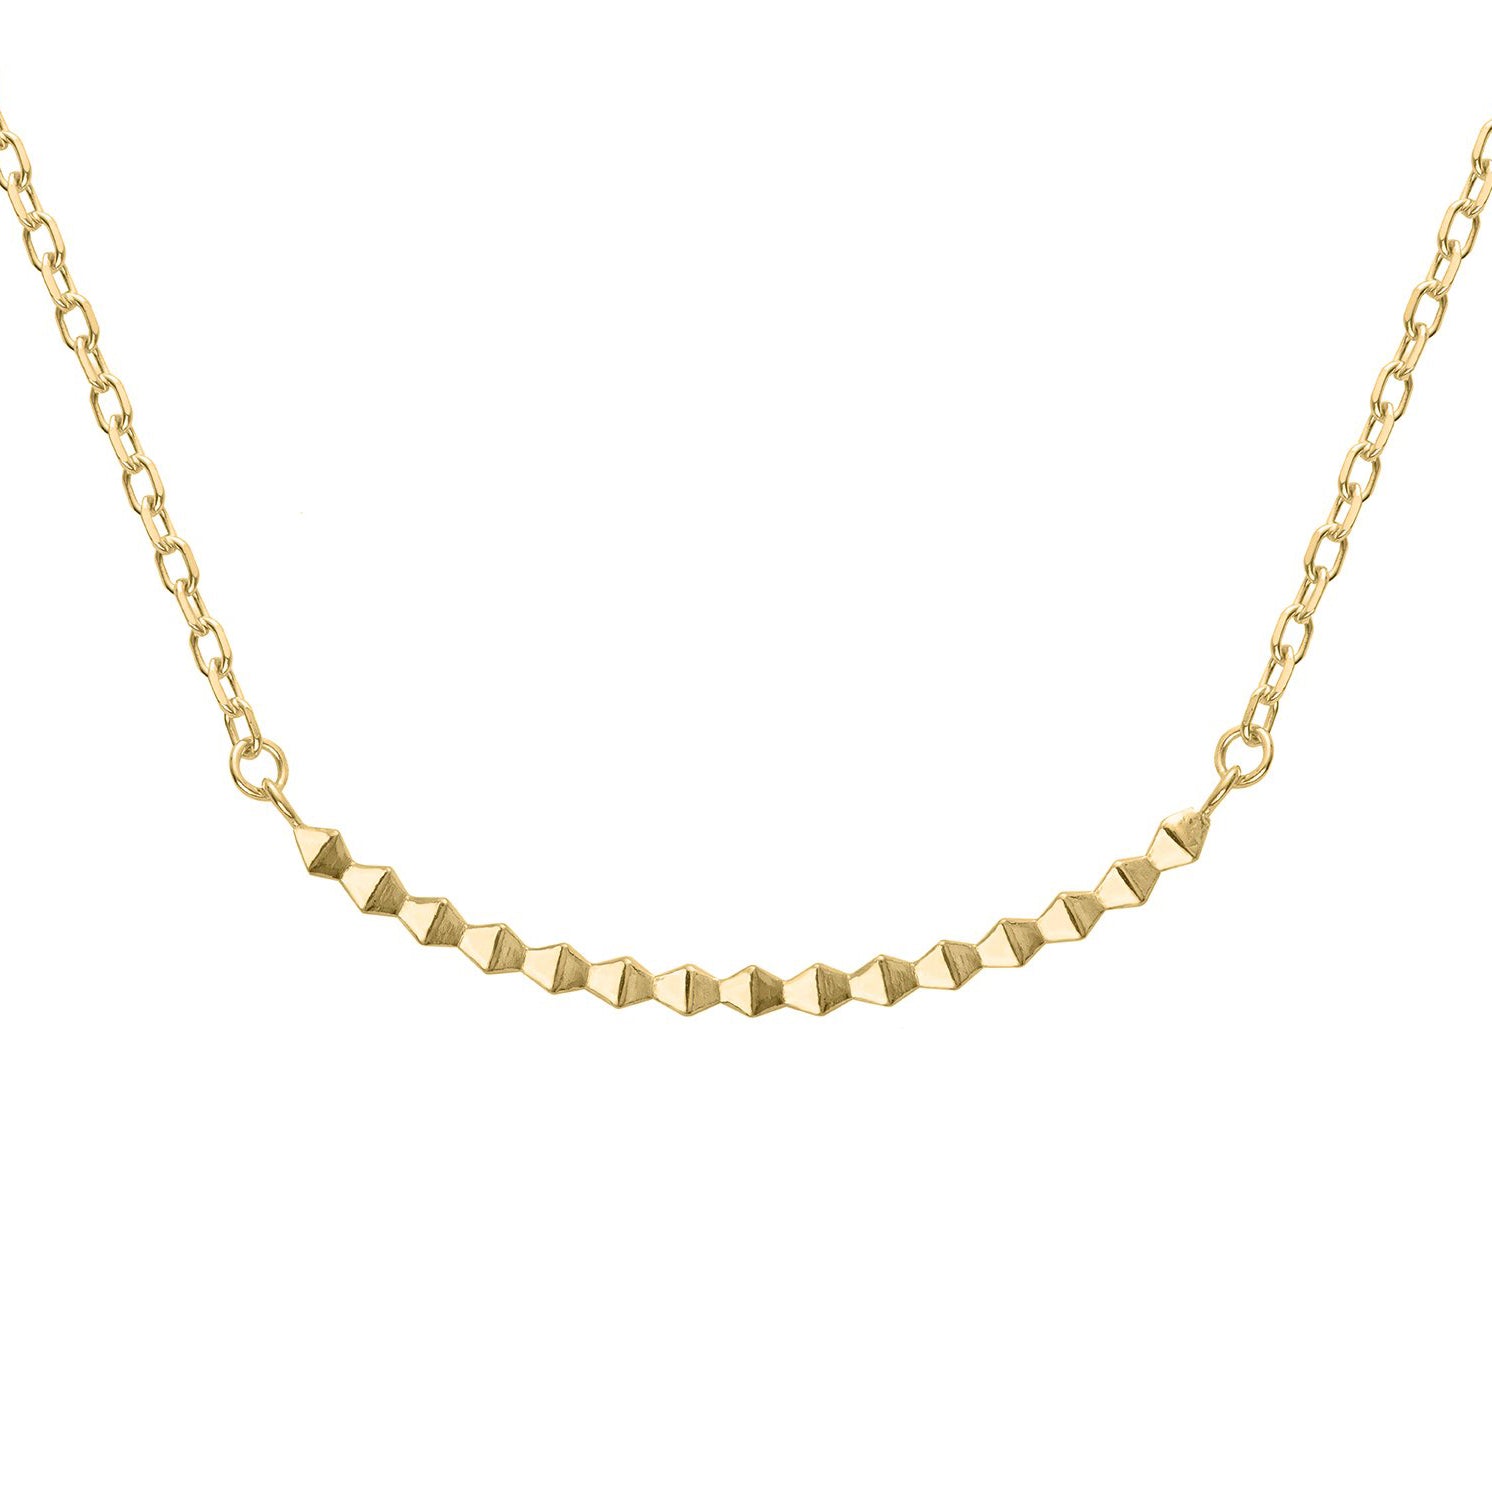 Pyra Choker Necklace - 18ct Gold Plated Sterling Silver - Romany Starrs